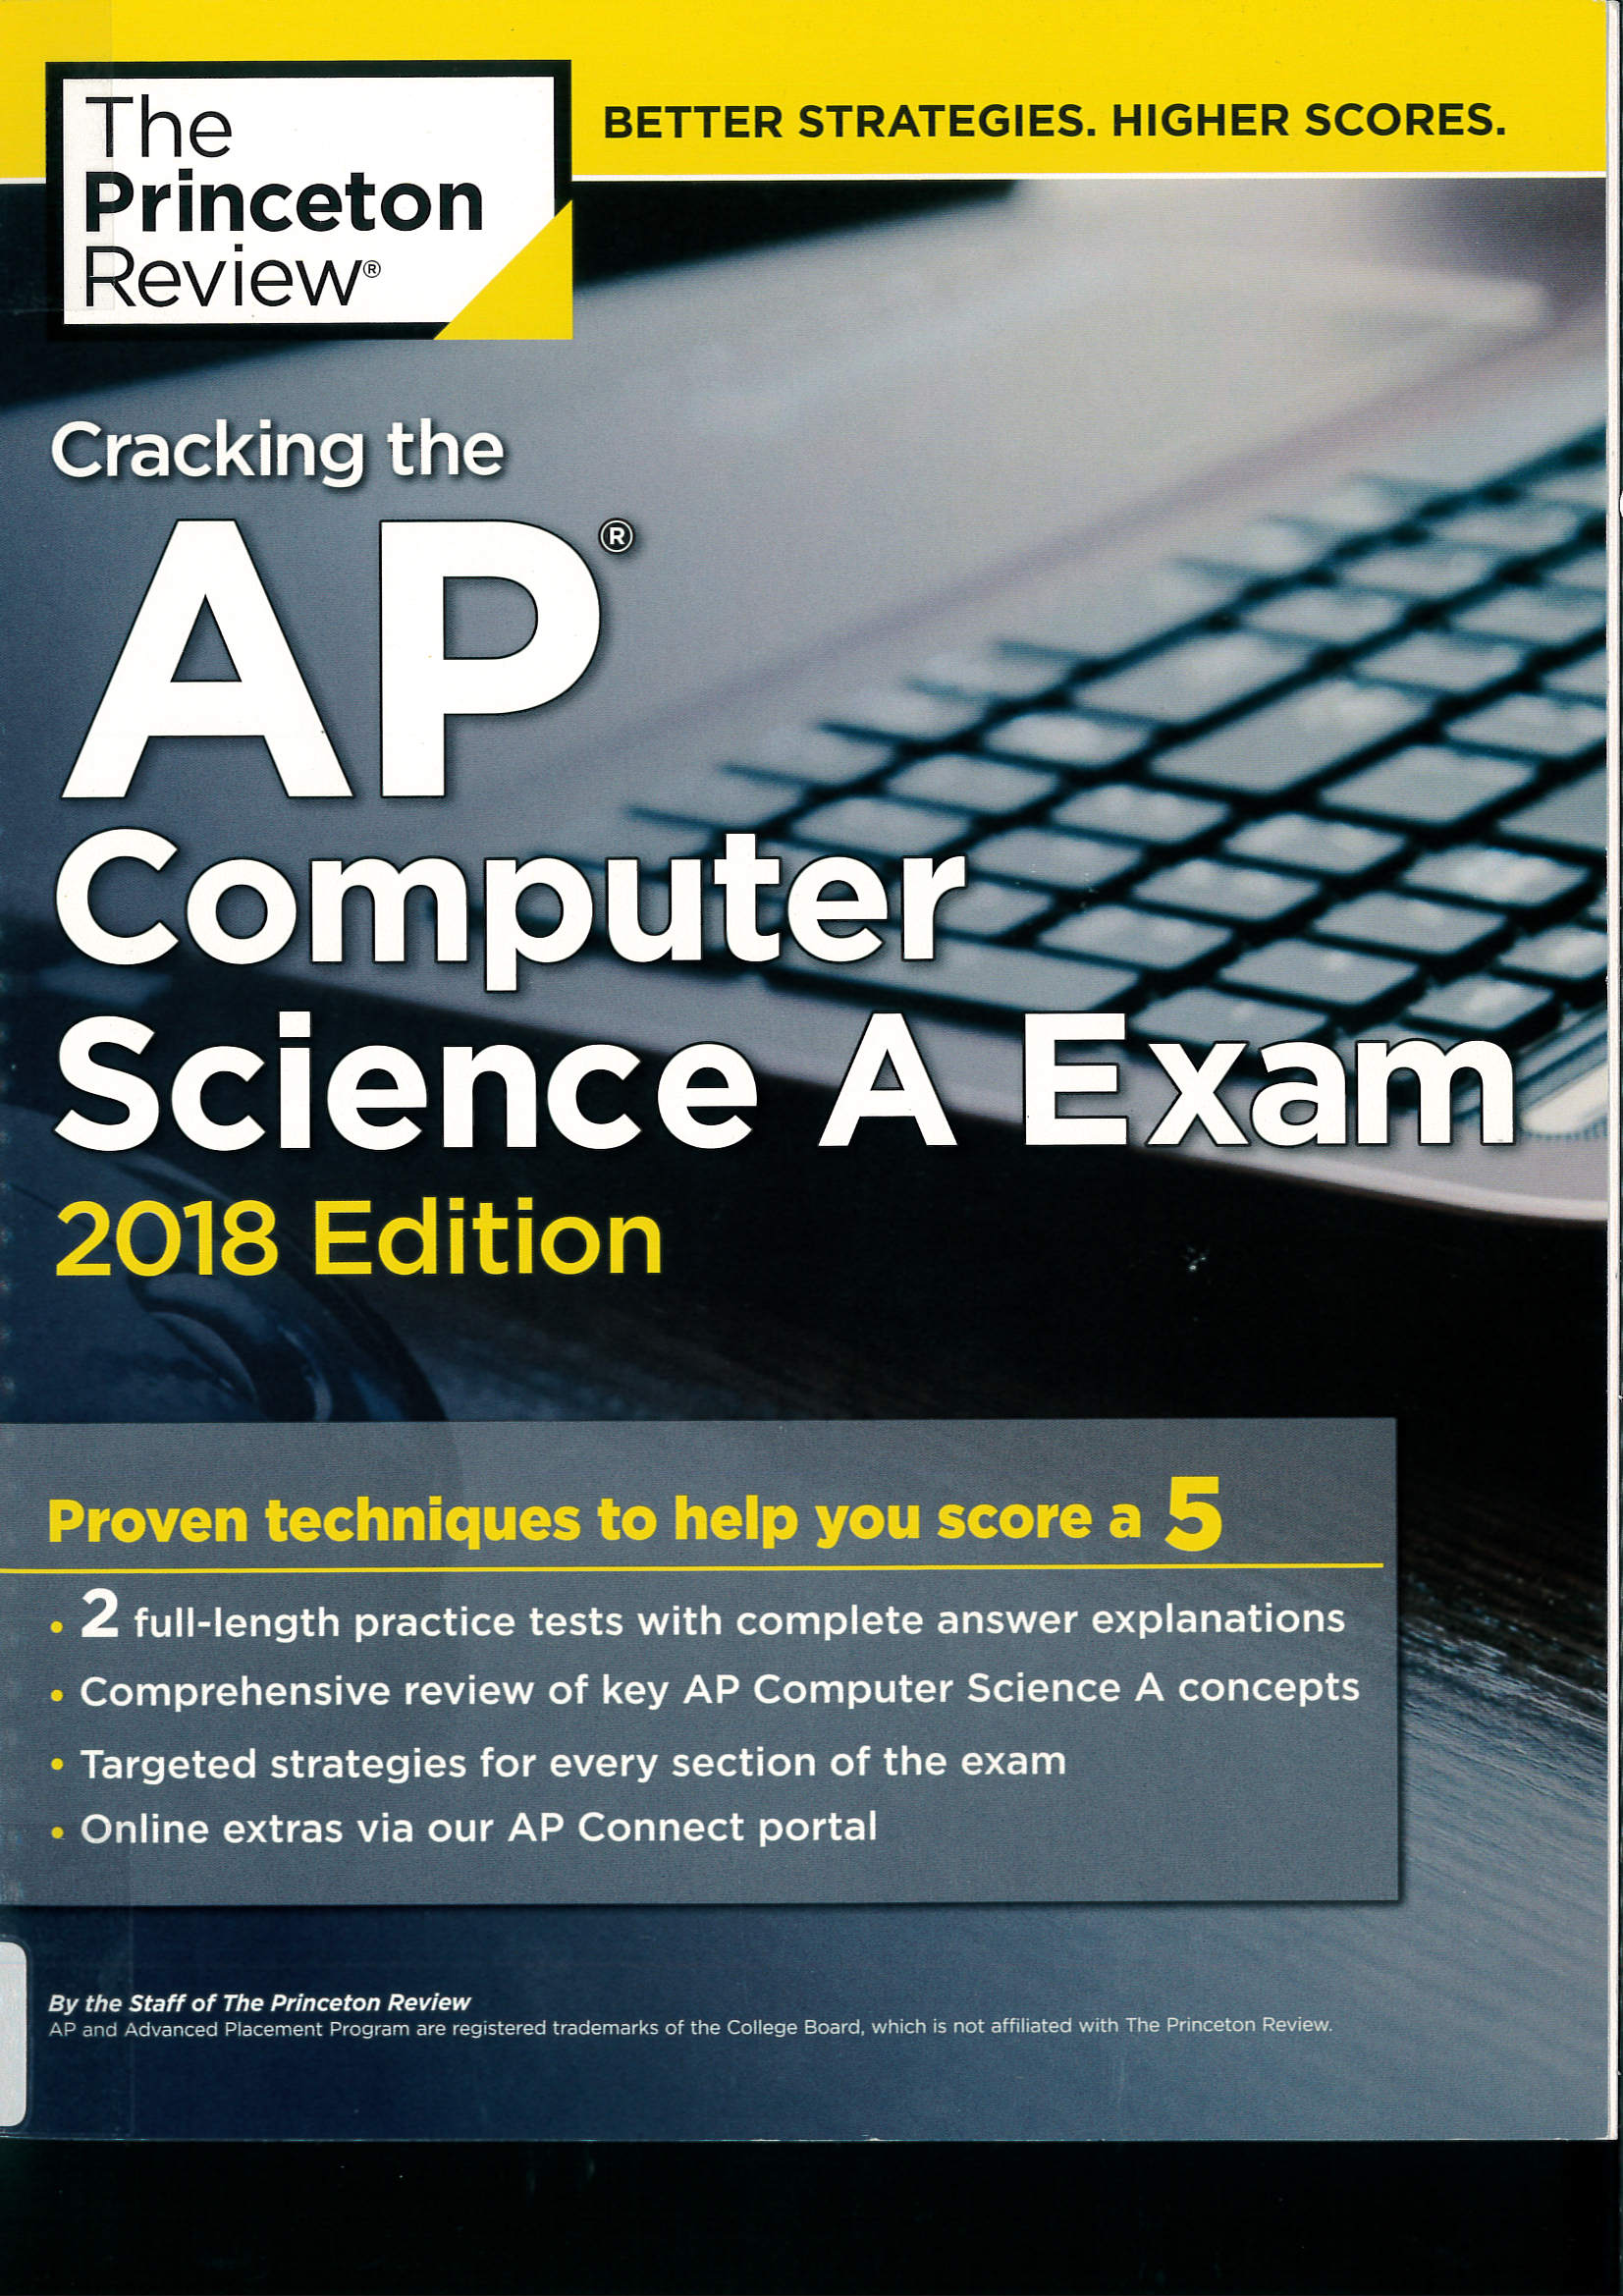 Cracking the AP computer science A exam 2018 edition